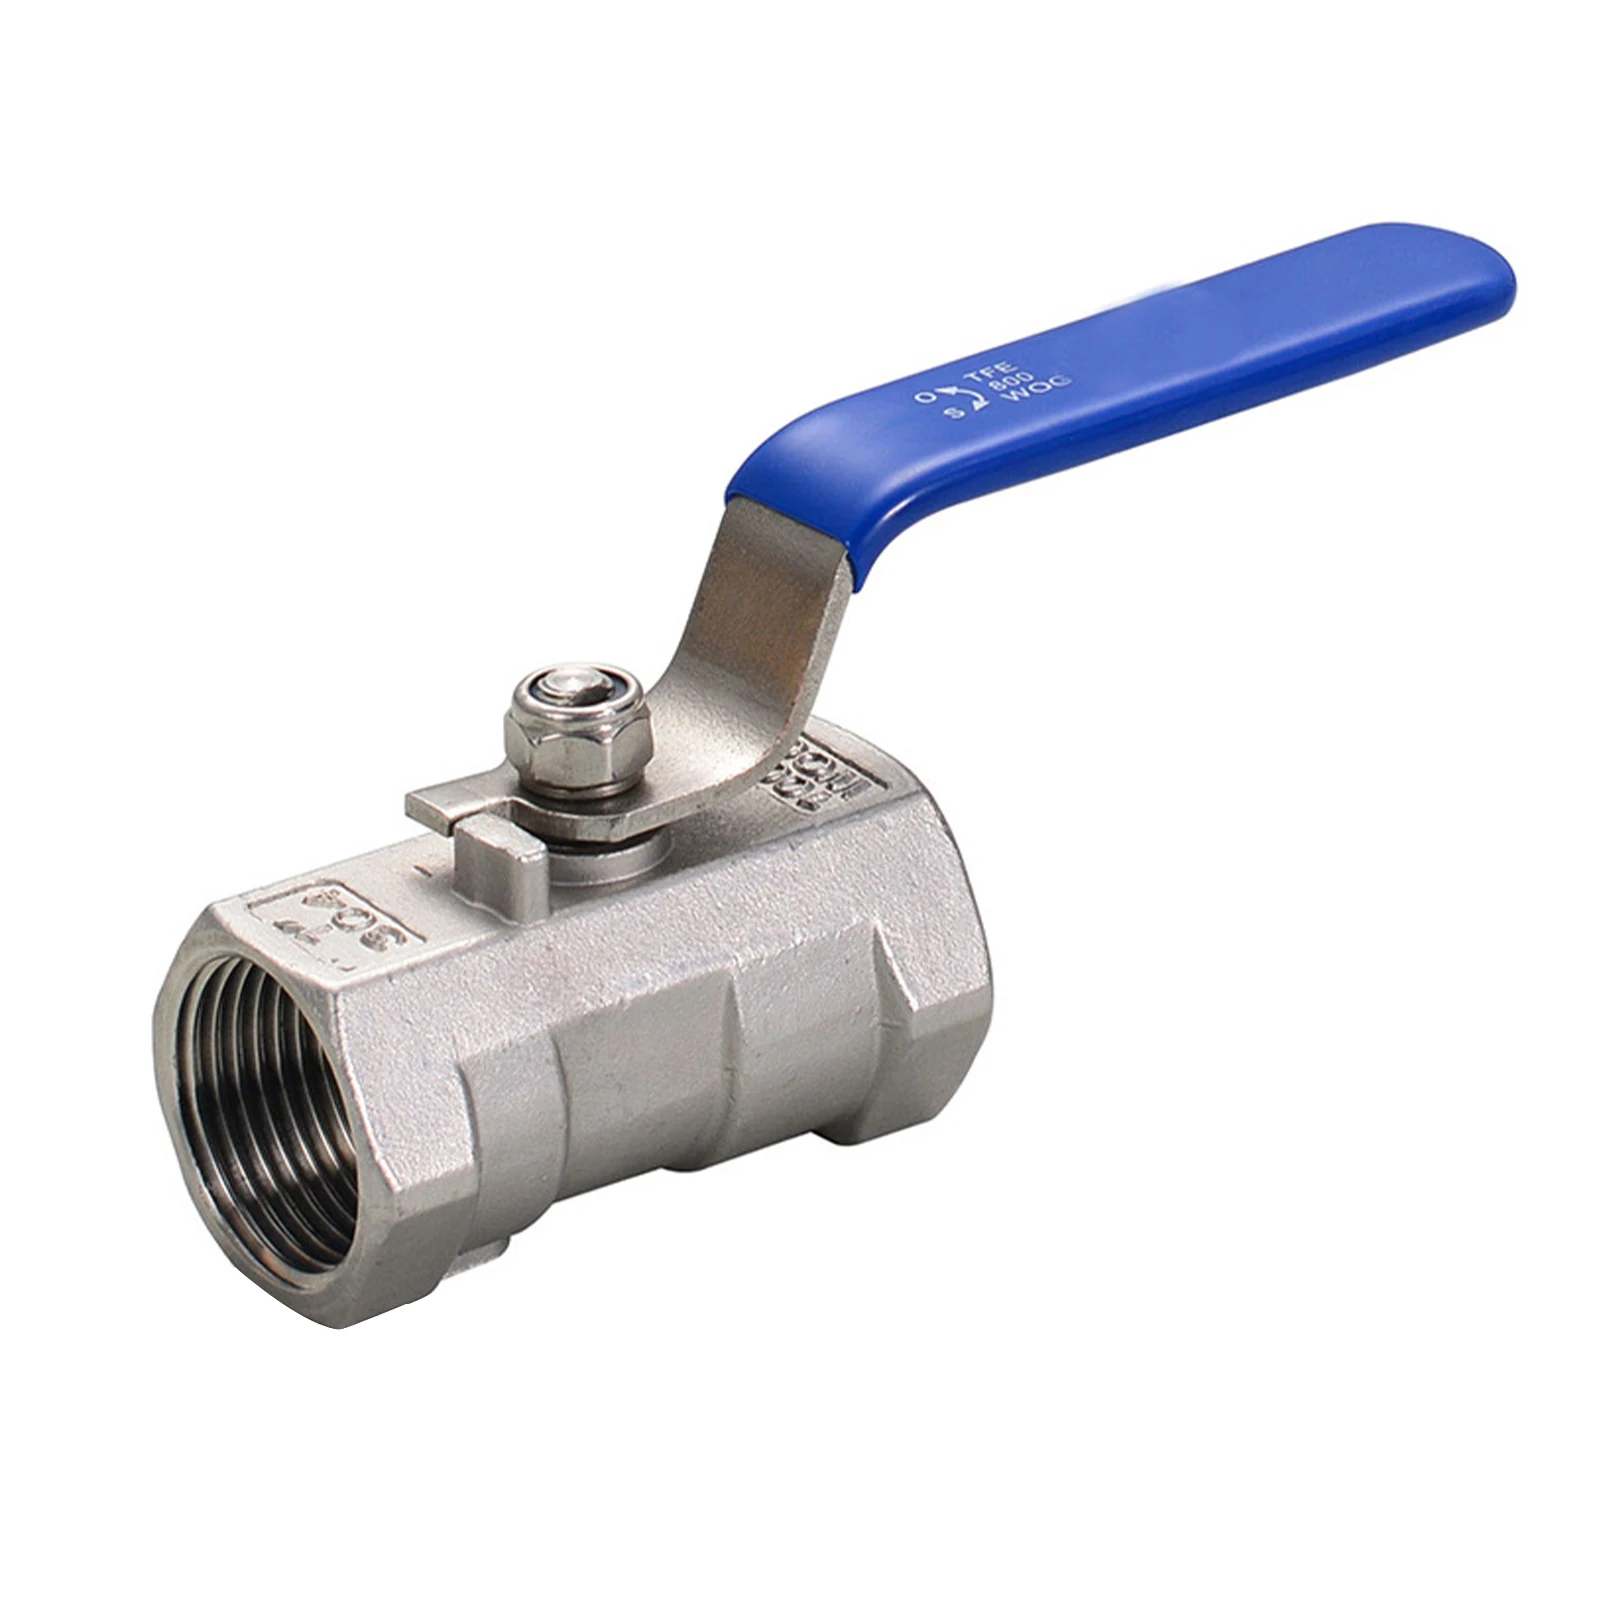 

Home Durable Ball Valve 1-1/2inch DN40 Internal Thread Professional Steam Gas Tools Easy Install With Handle Stainless Steel